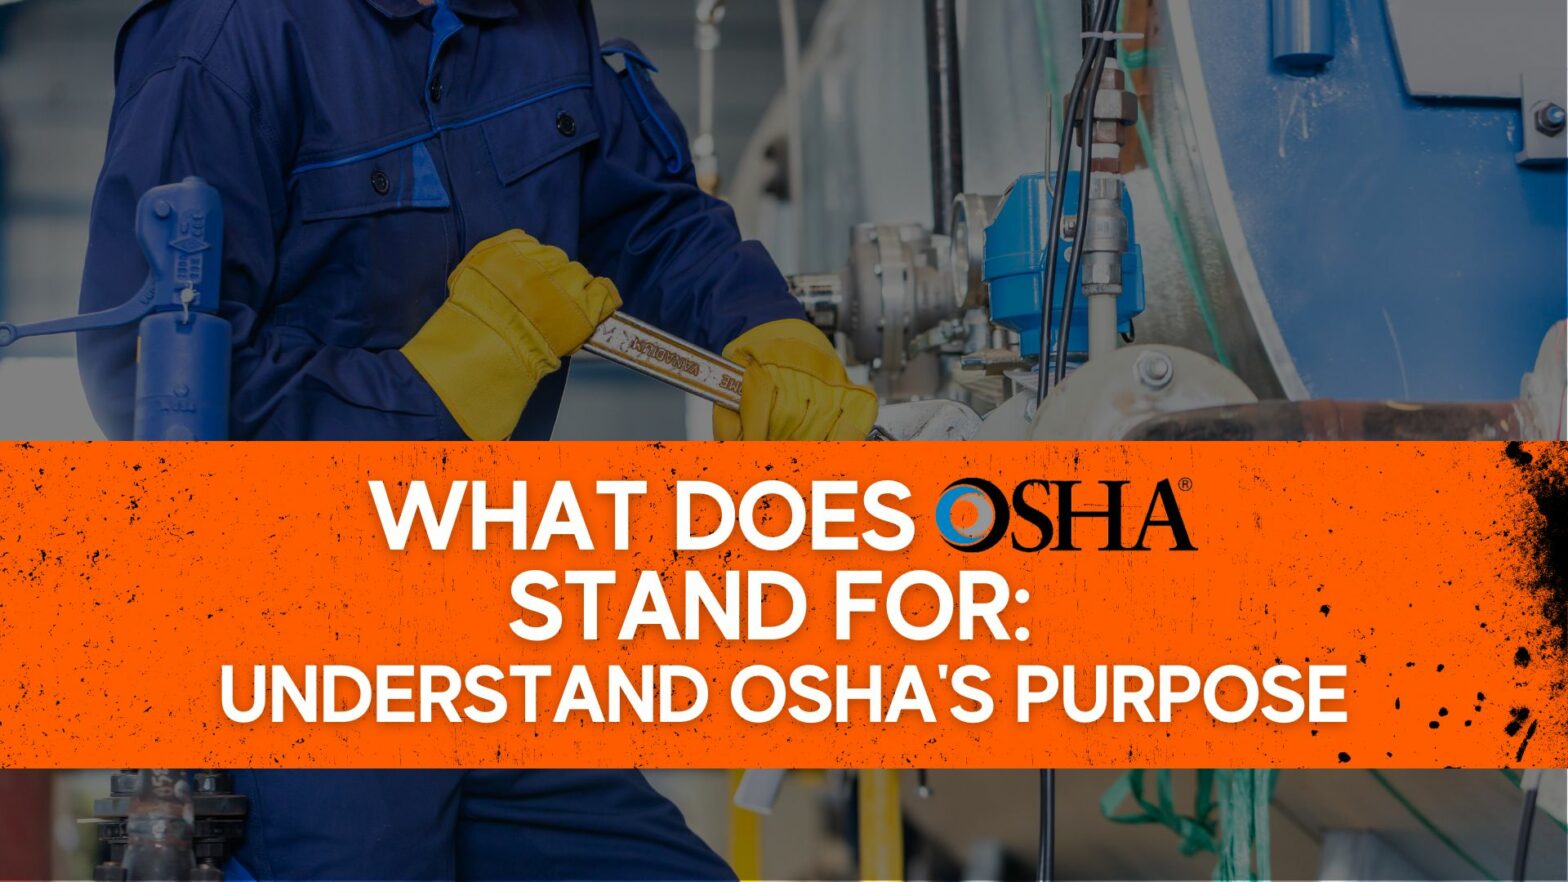 chemical data osha stands for